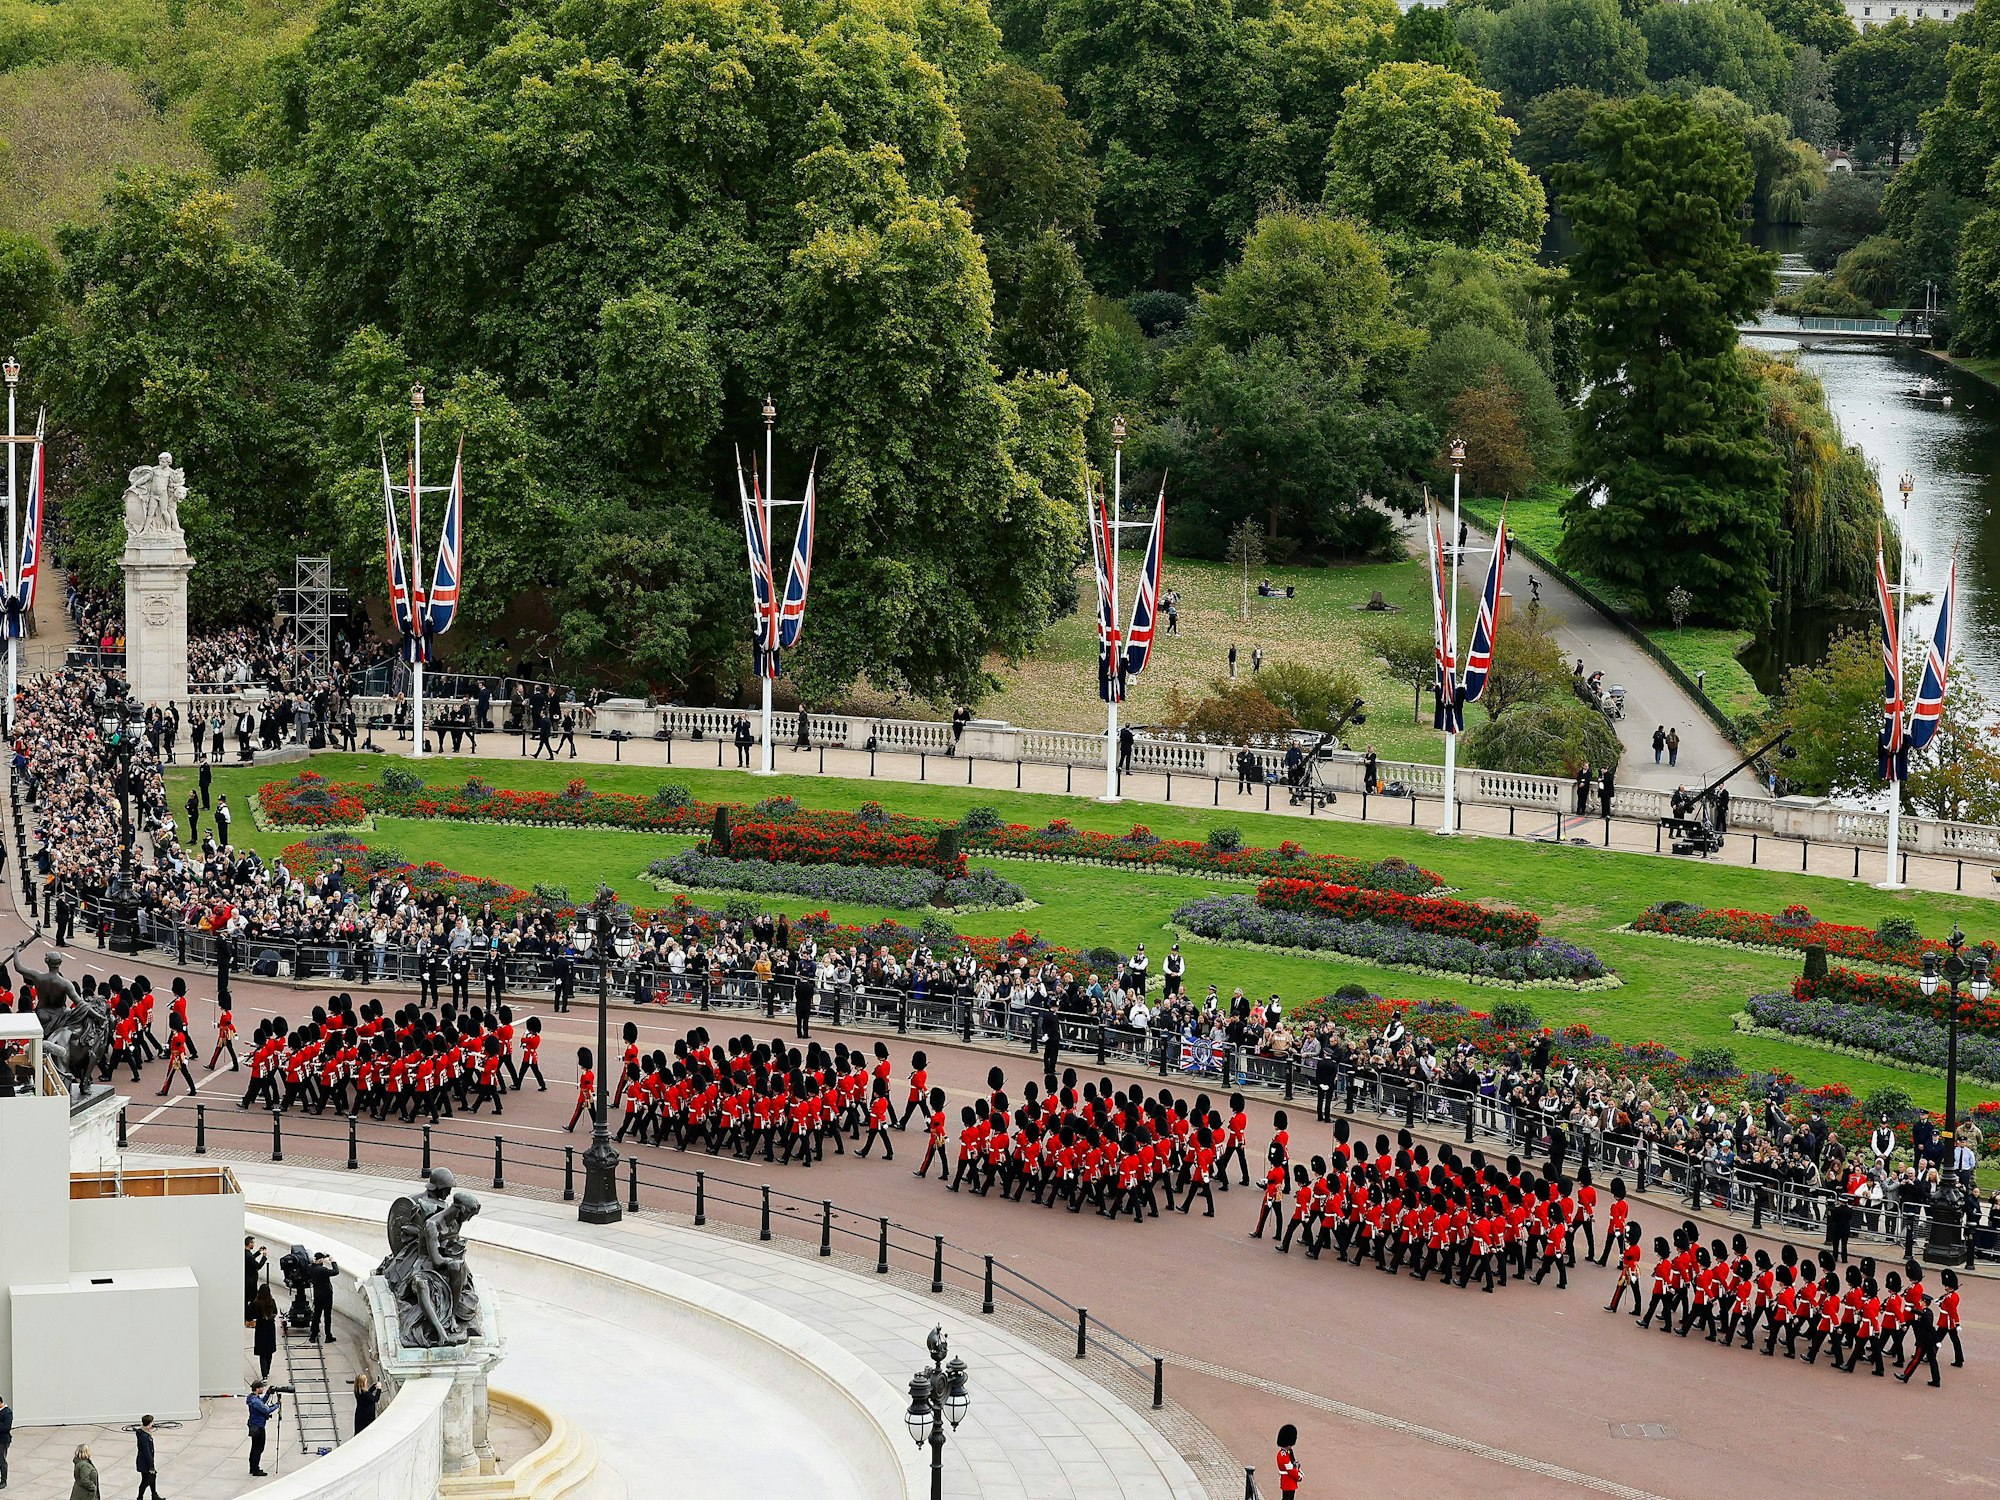 Coldstream Guards proceed down The Mall ahead of The State Funeral of Queen Elizabeth II, in London, Monday, Sept. 19, 2022. (Chip Somodevilla/Pool Photo via AP)